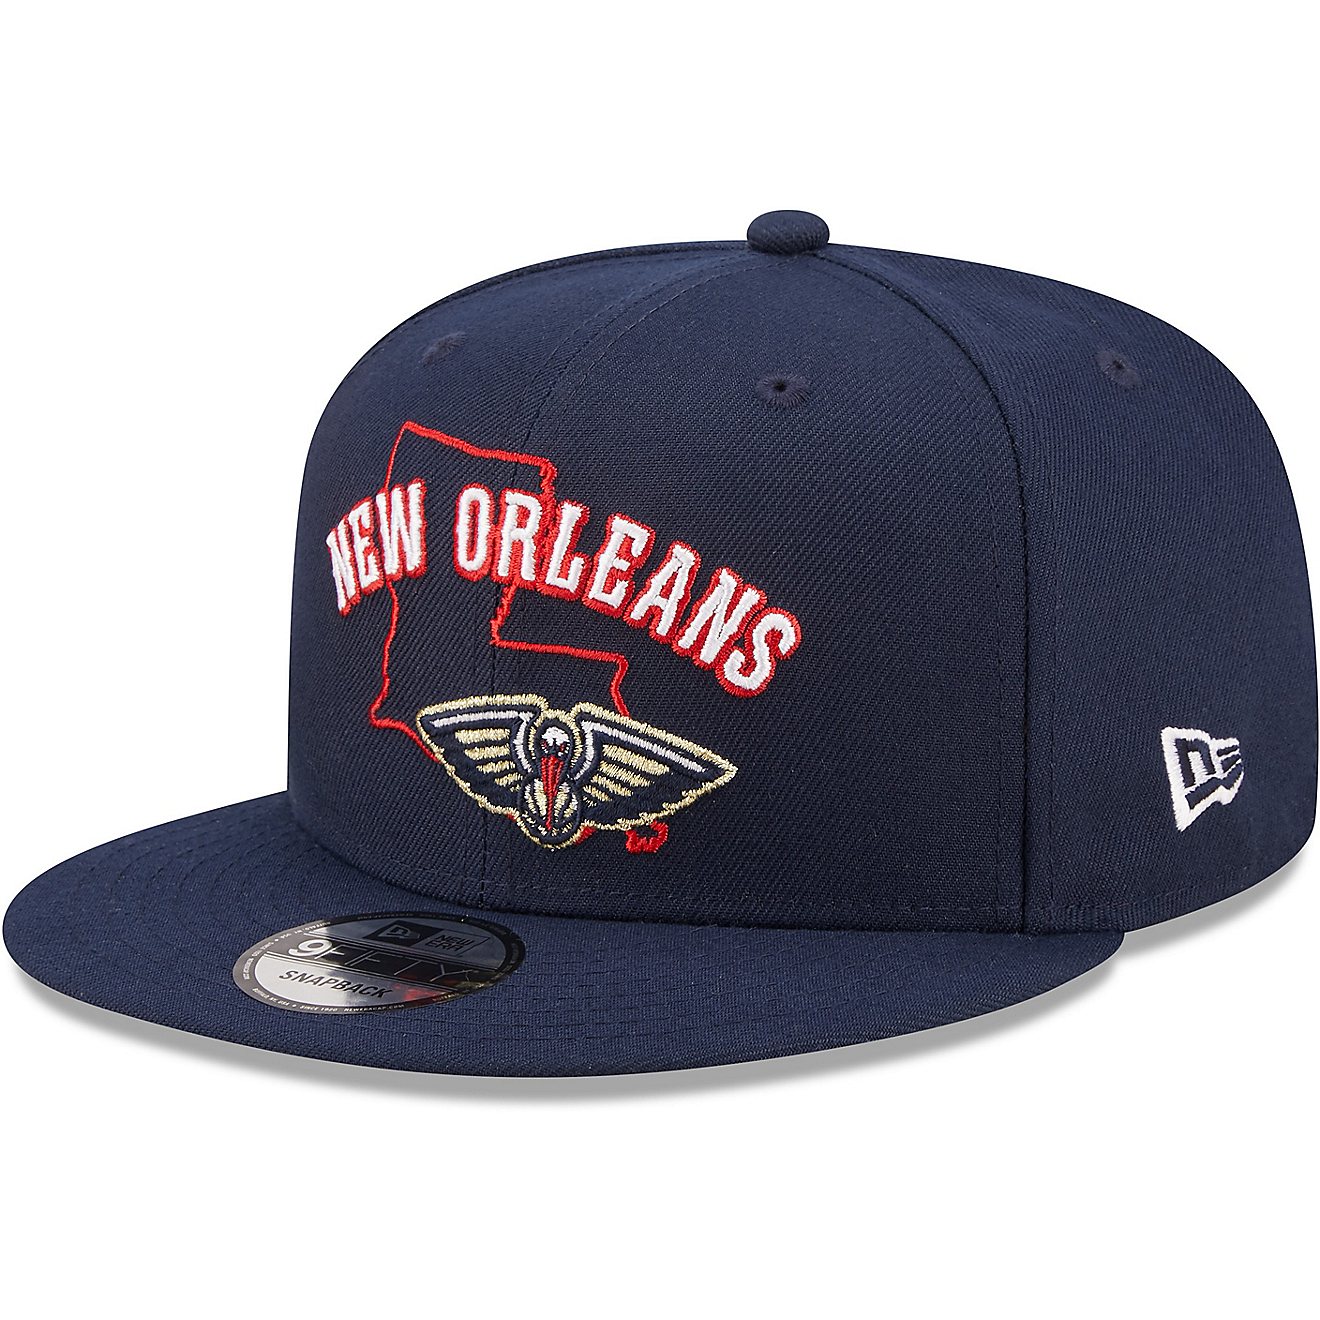 New Era Men's New Orleans Pelicans Logo State 9FIFTY Cap                                                                         - view number 3